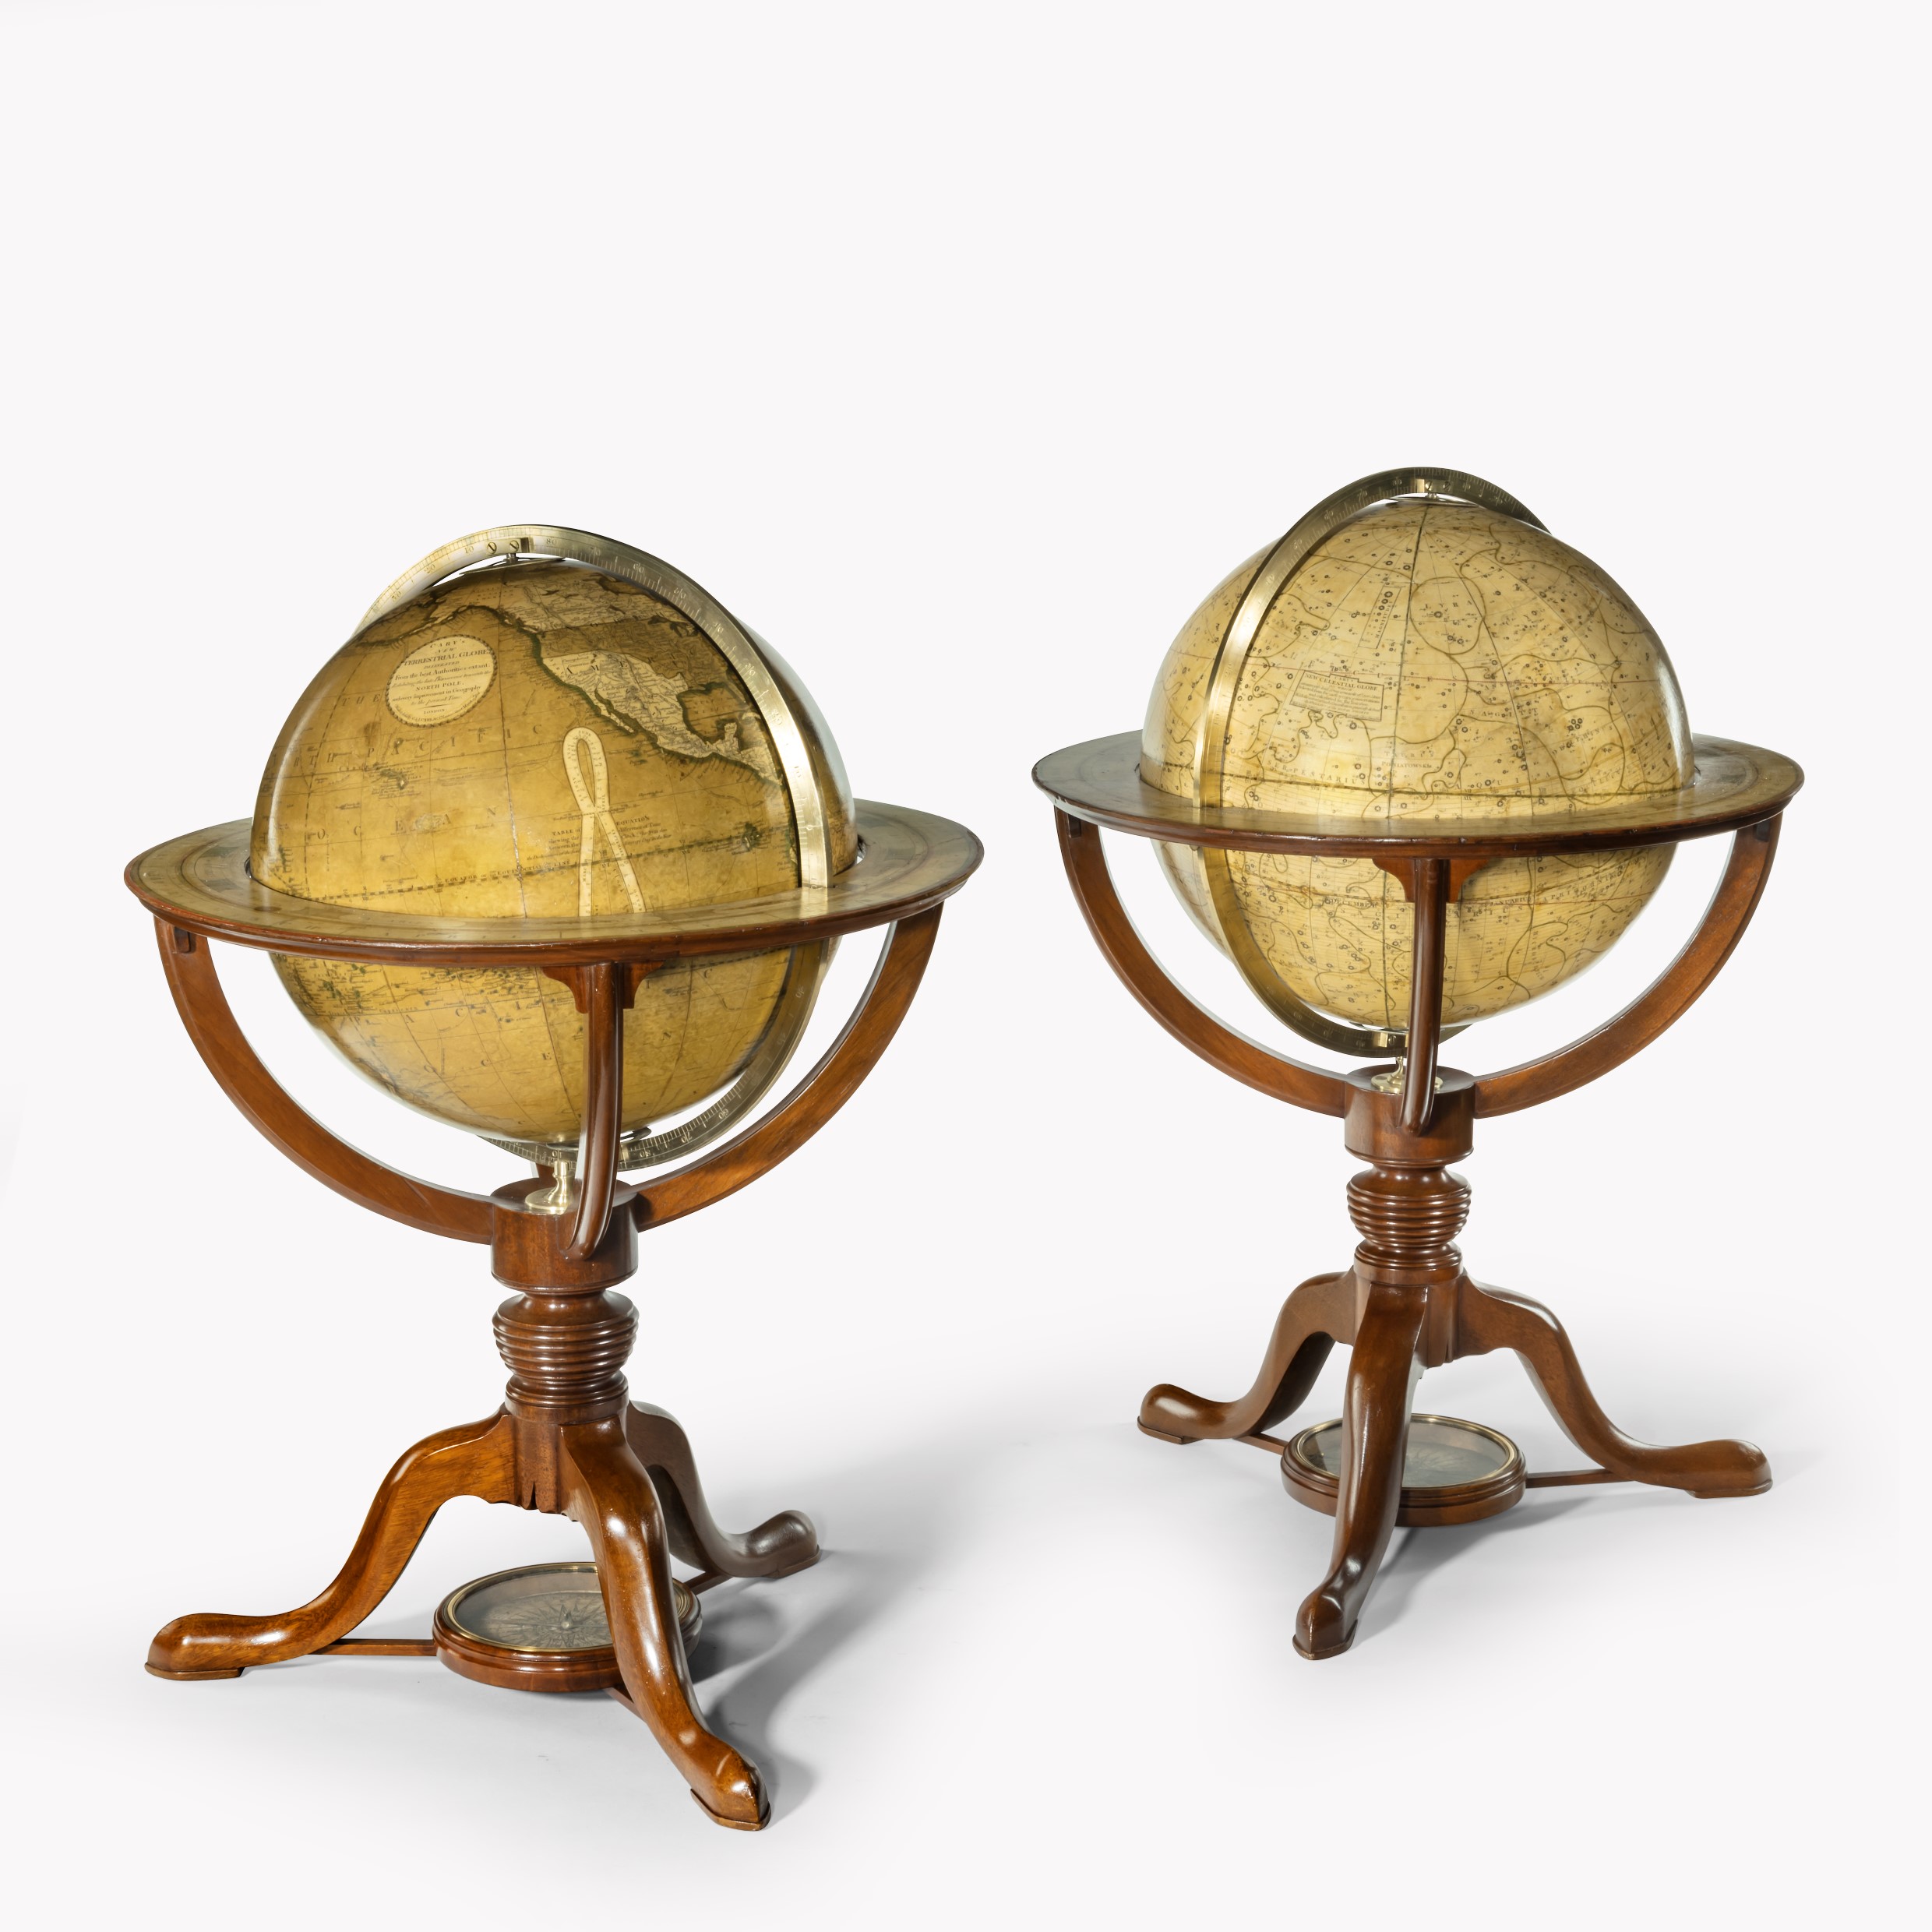 pair 12 inch table globes by G & J Cary dated